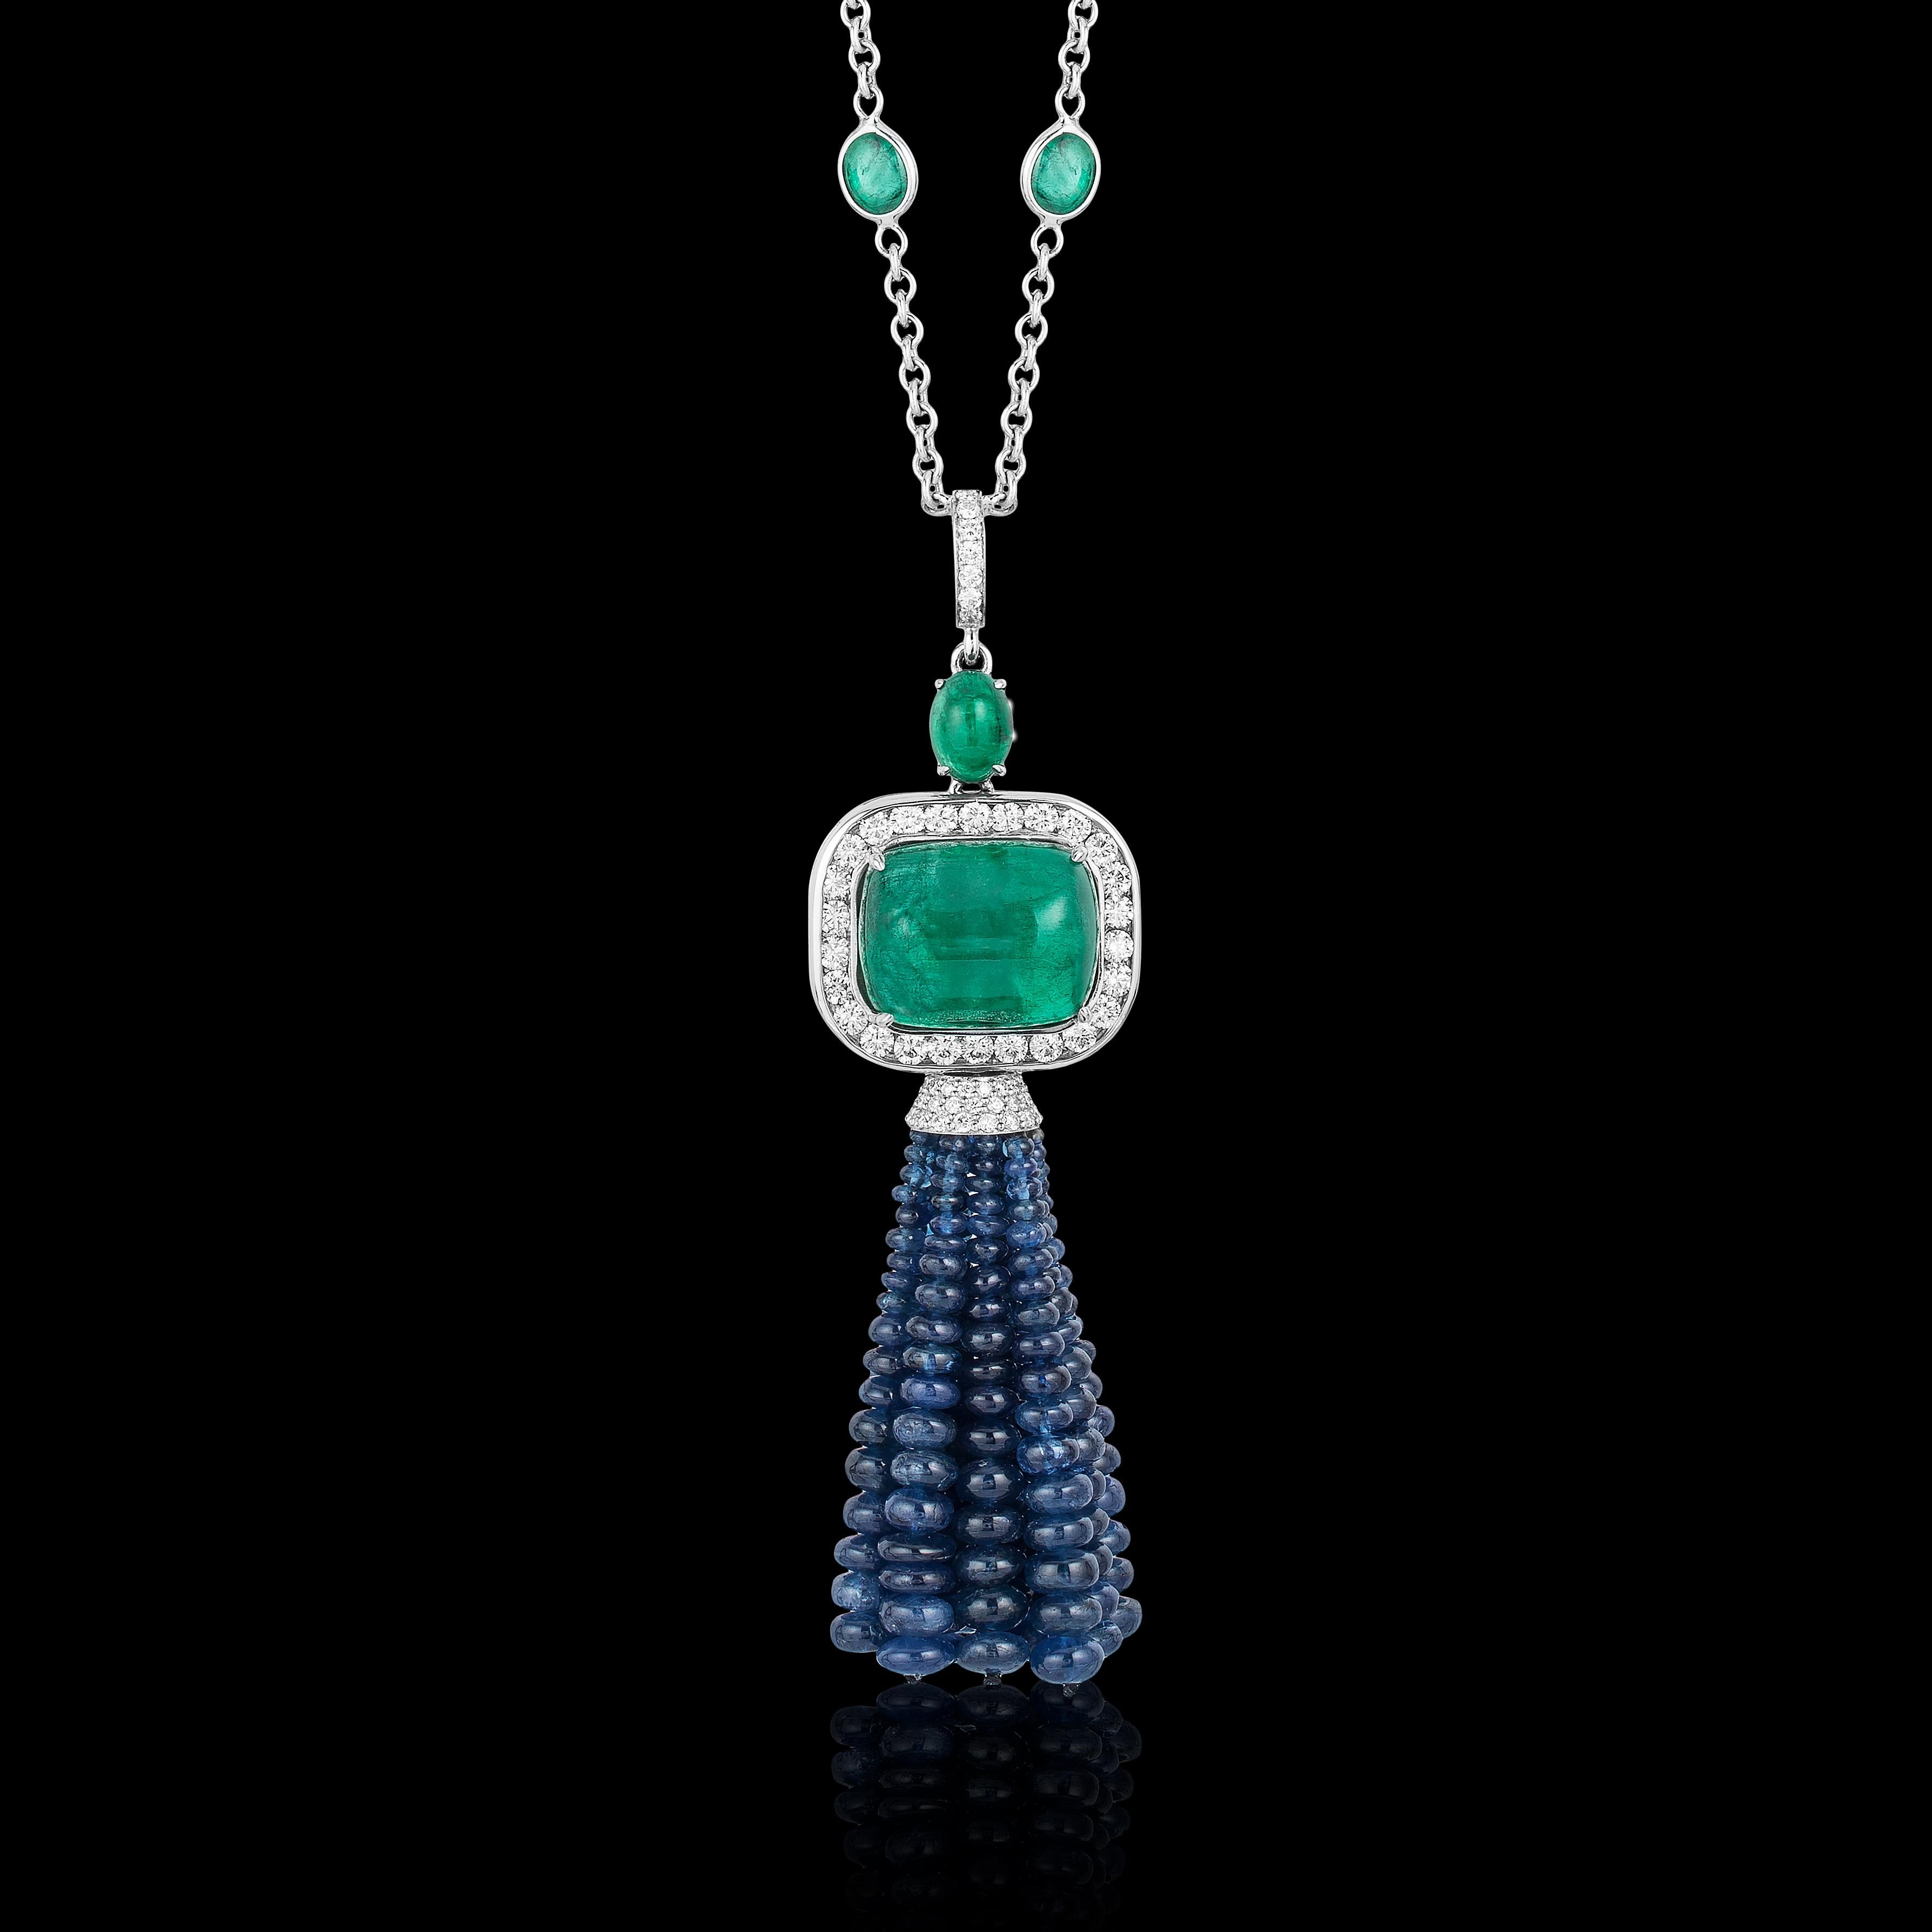 Andreoli CDC Certified Emerald Sapphire Cabochon Bead Chain Tassel Necklace 18 Karat White Gold. This necklace features a 23.46 carat Emerald cabochon center stone CDC Certified Zambian Origin Insignificant Oil. On the chain there are 15.52 caras of